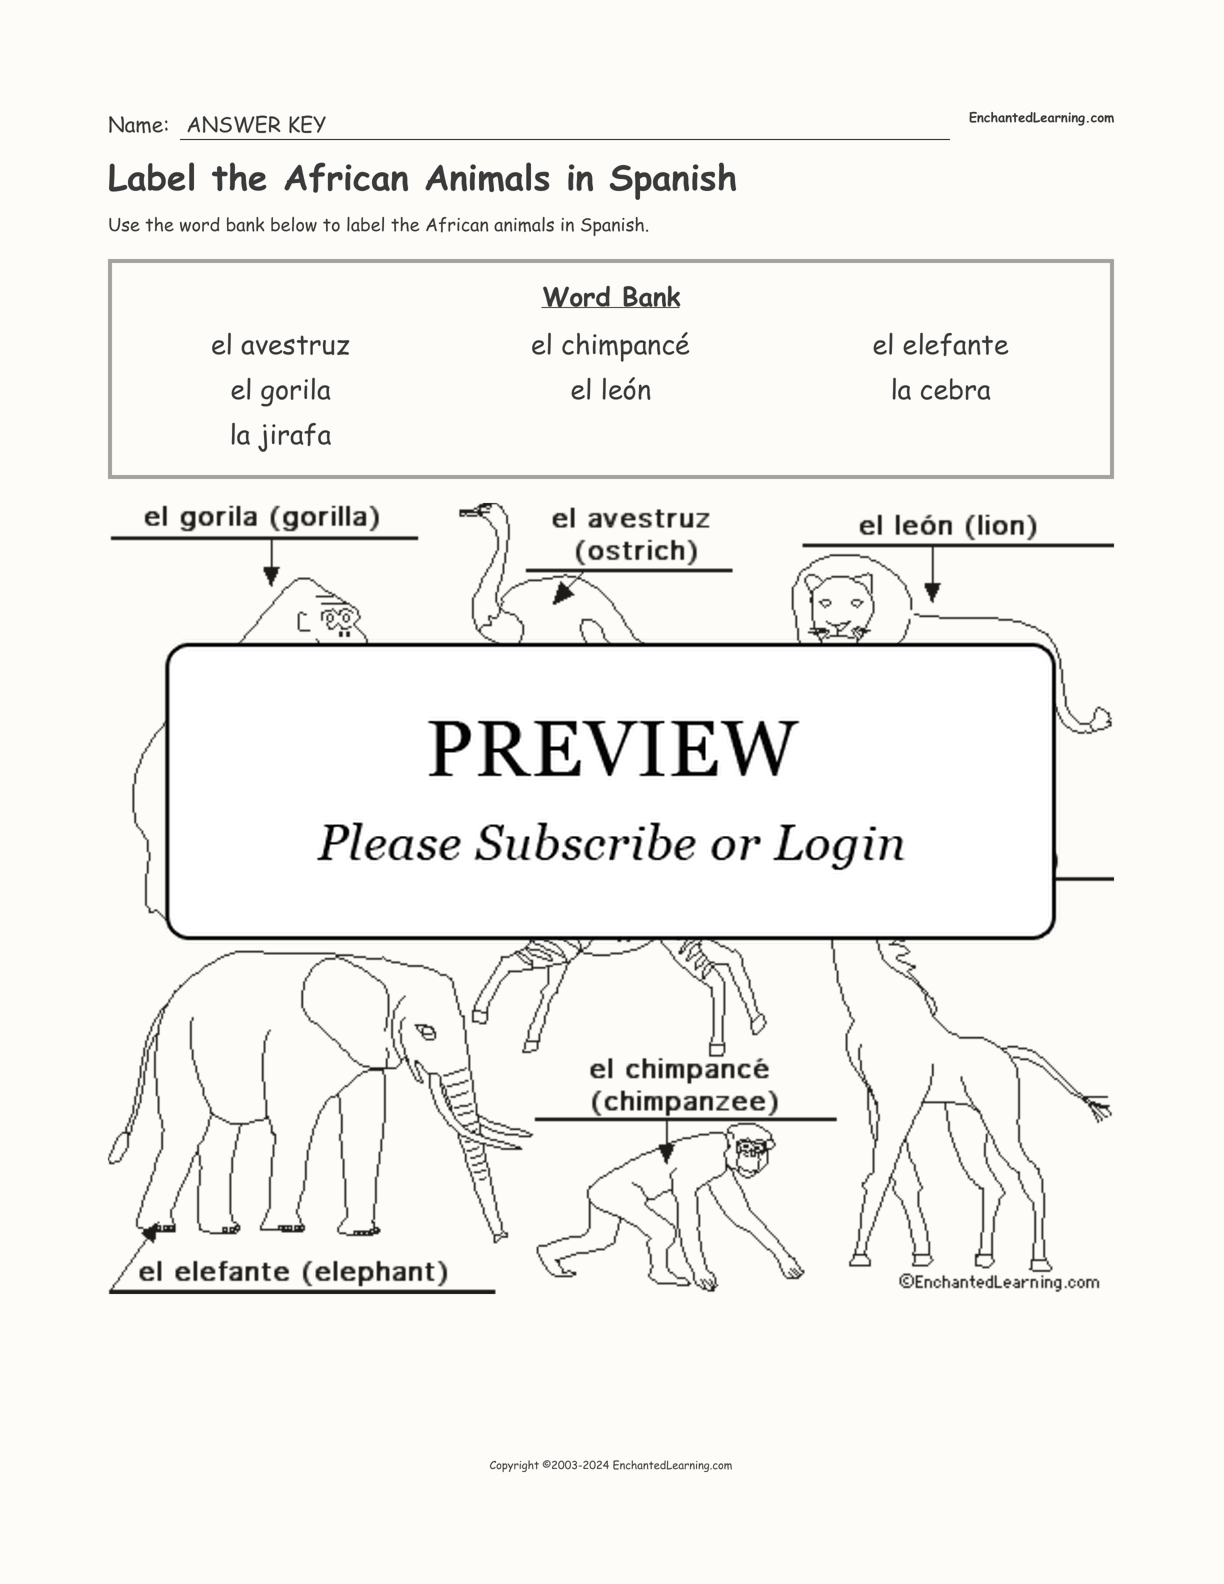 Label the African Animals in Spanish interactive worksheet page 2